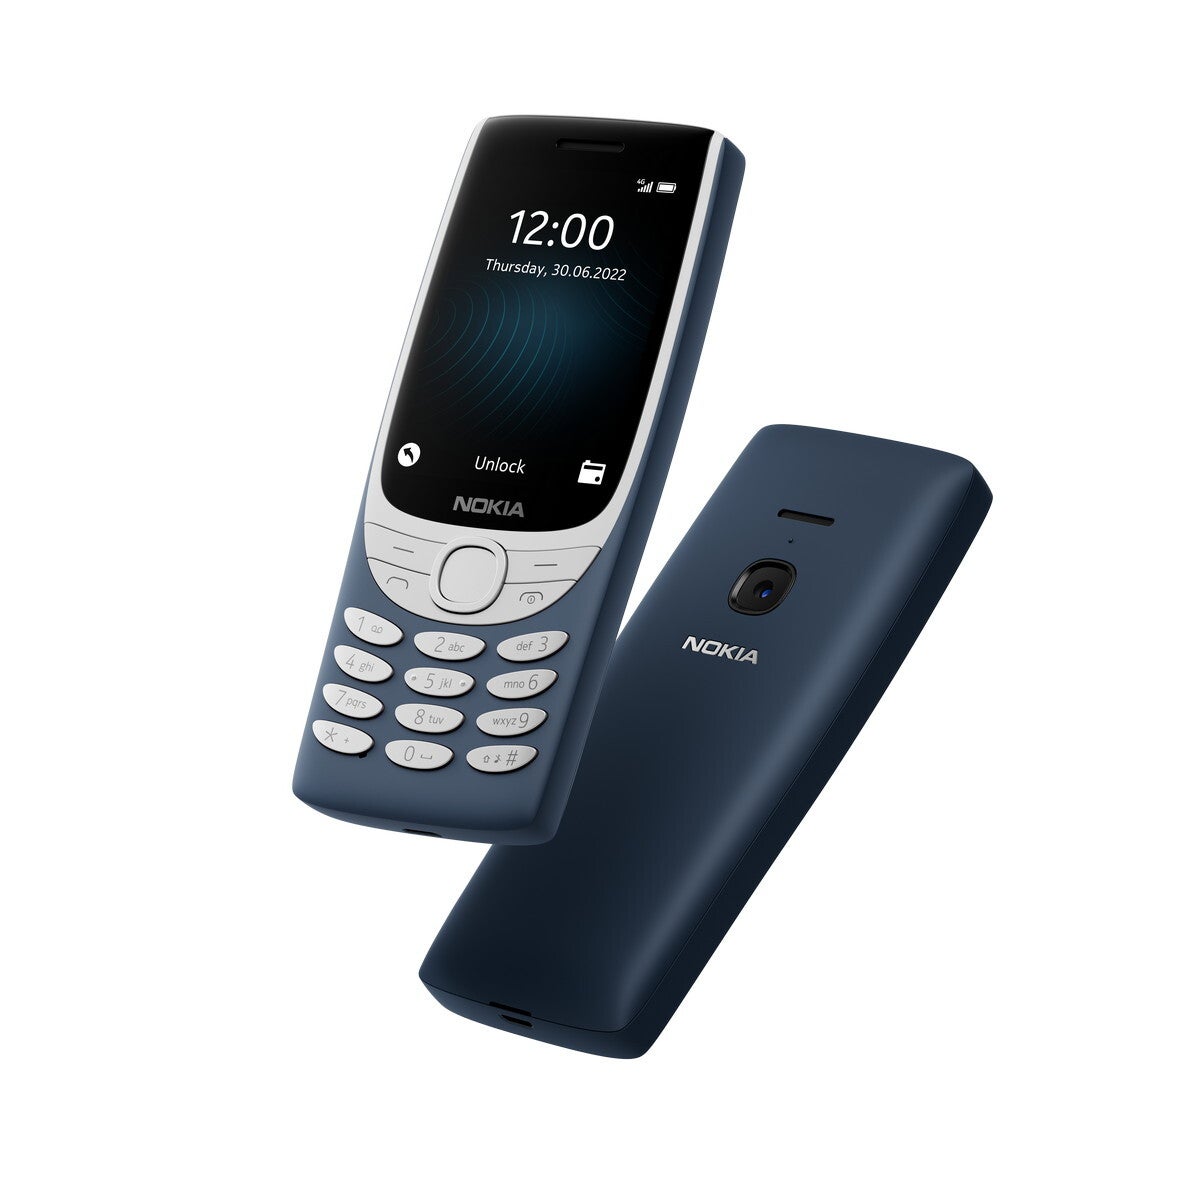 Nokia 8210 - Nokia brings back the retro charm with three feature phones, Android tablet